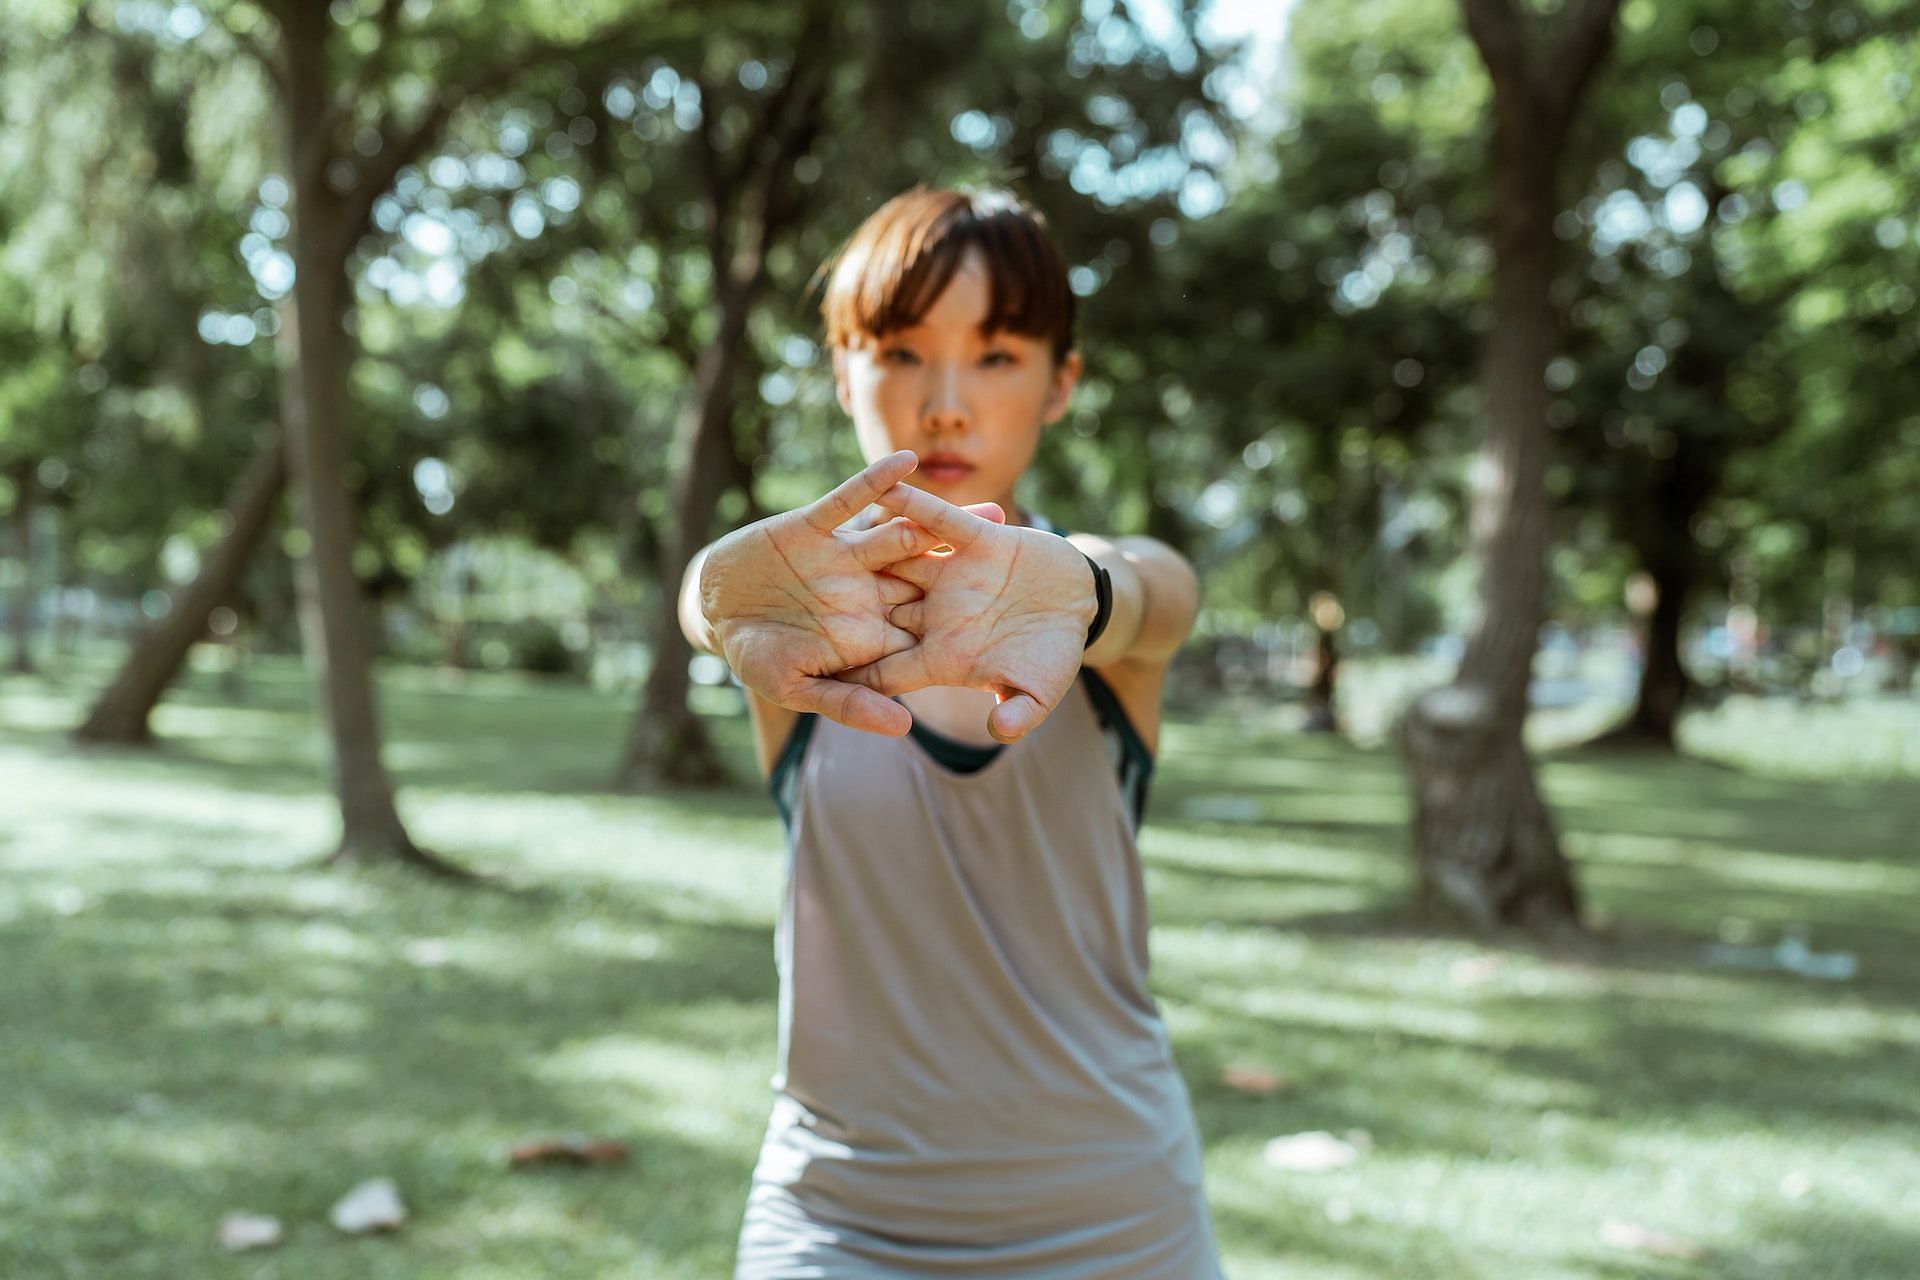 Stretches for rotator cuff can strengthen the muscles and reduce the chance of injury. (Photo via Pexels/Ketut Subiyanto)